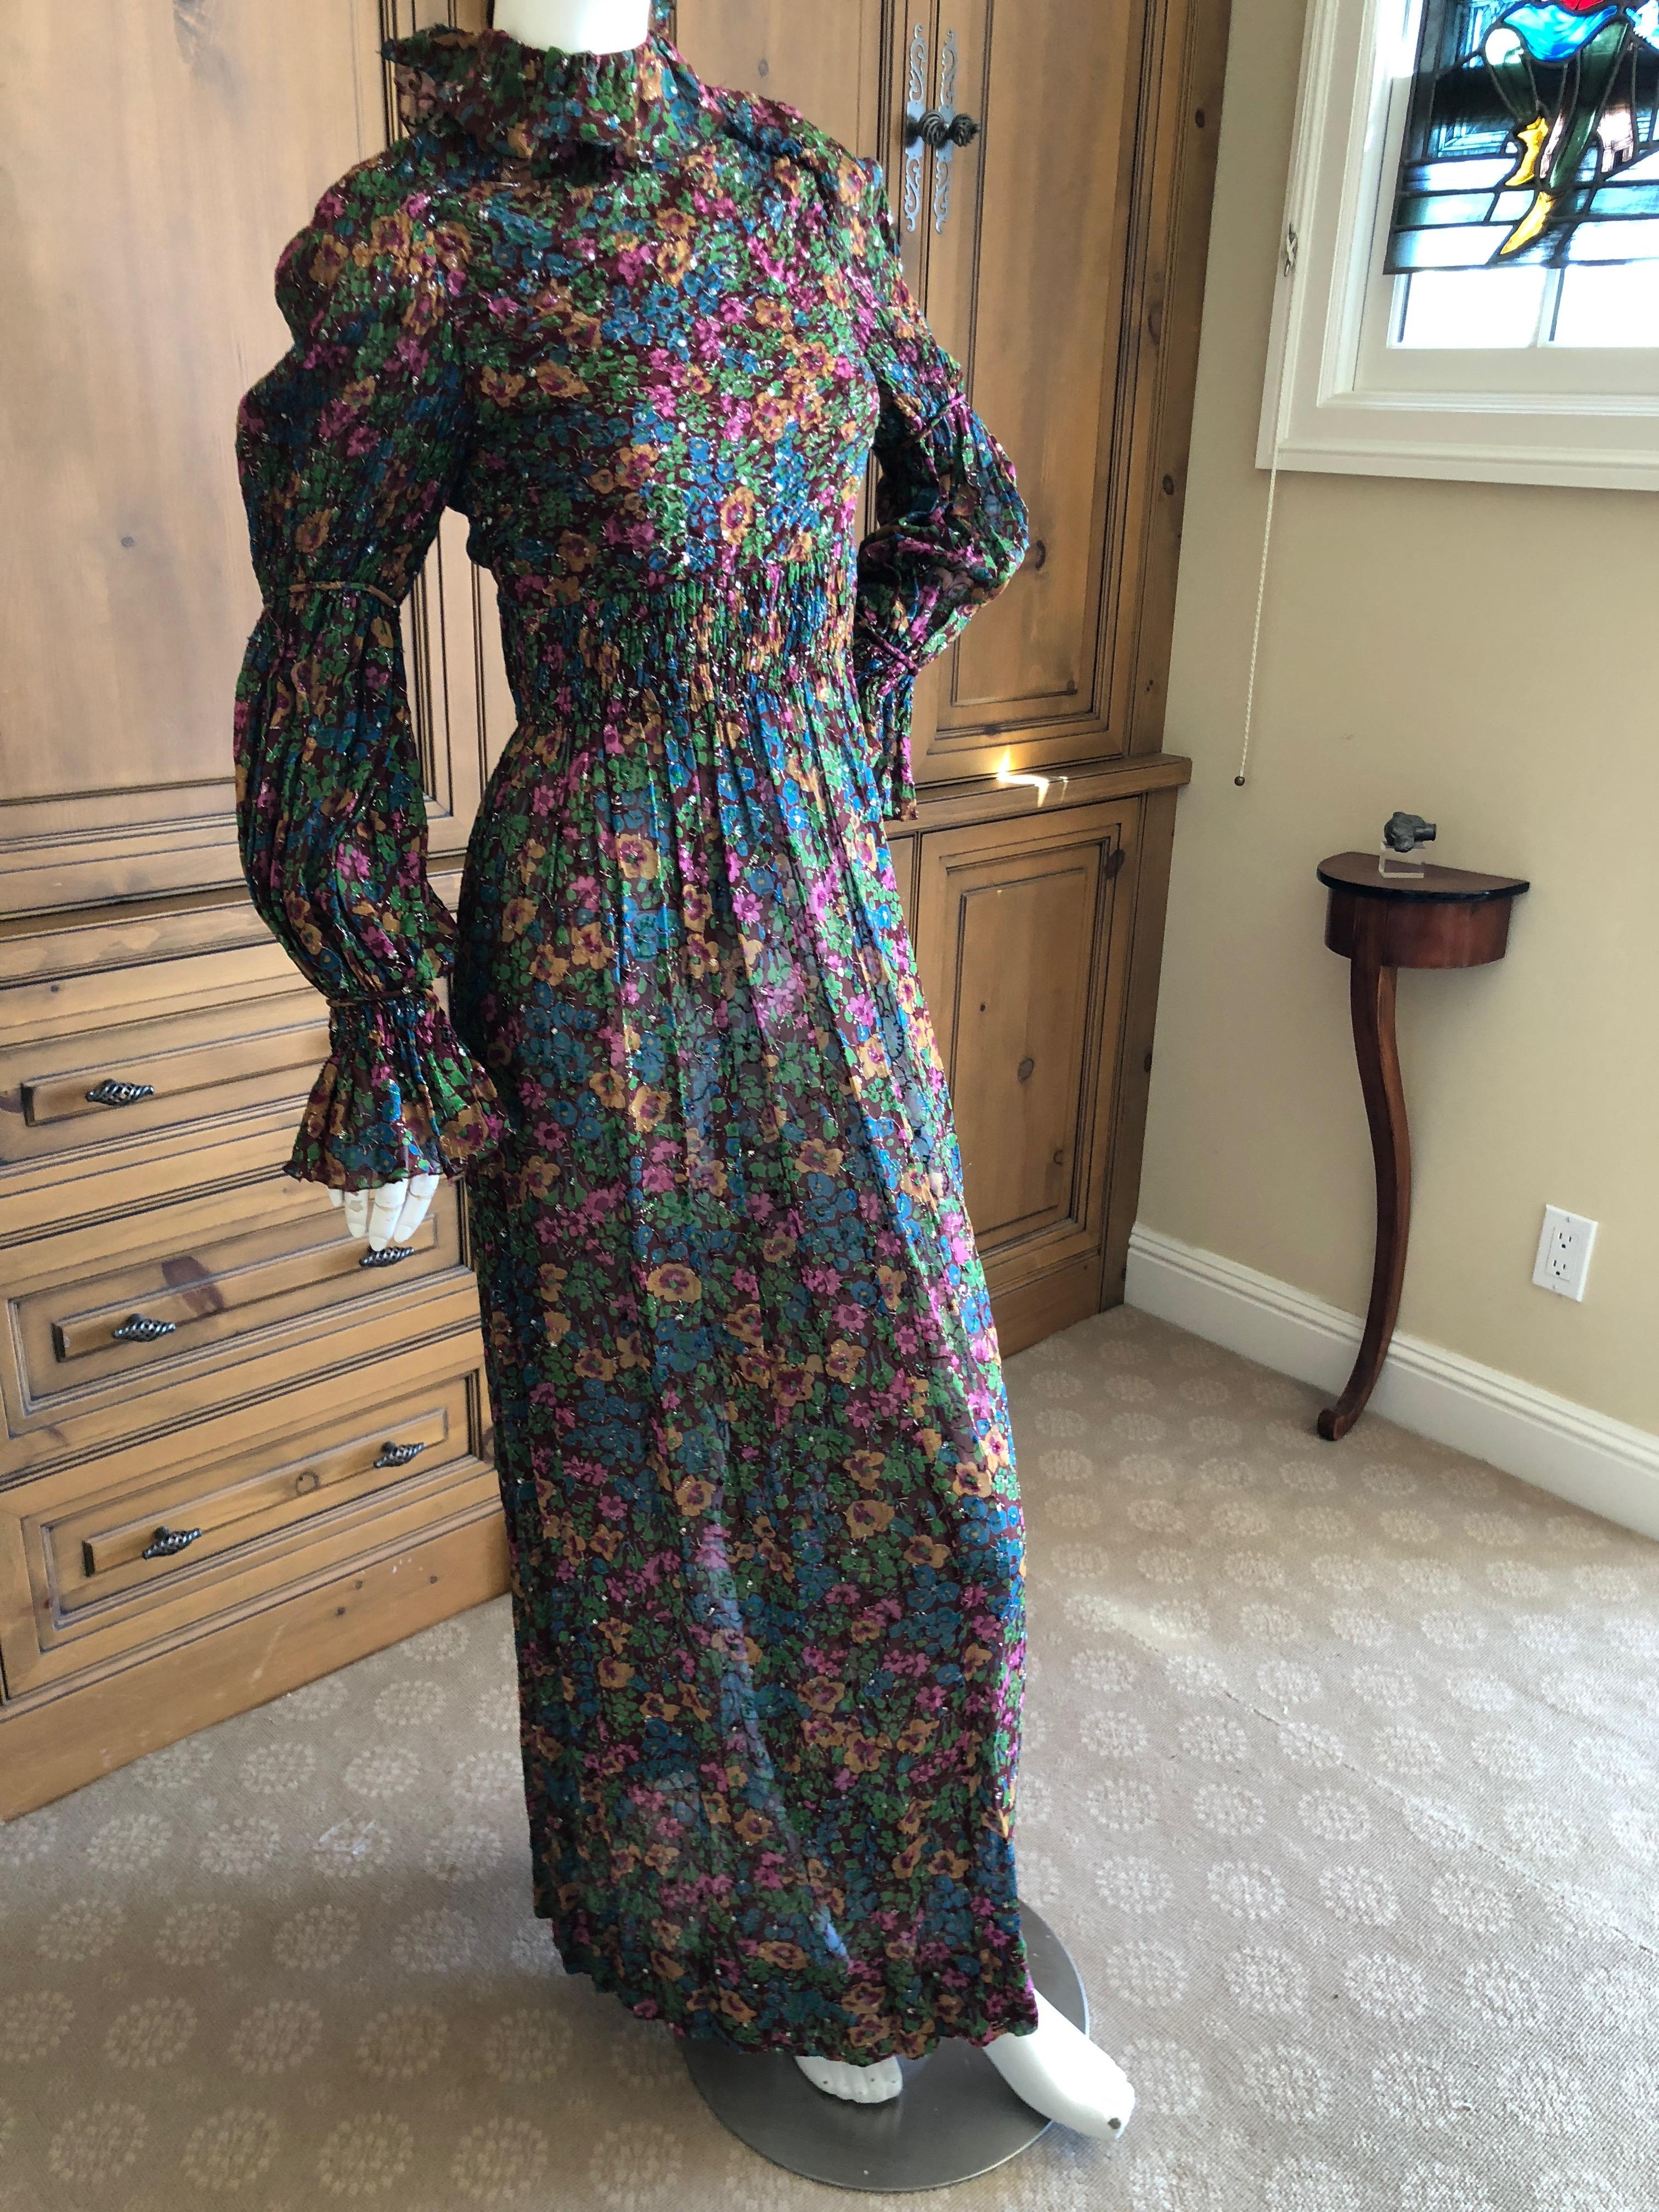 Cardinali Fall 1971 Ruffle Silk  Floral Evening Dress with Pin Tuck Details In Good Condition For Sale In Cloverdale, CA